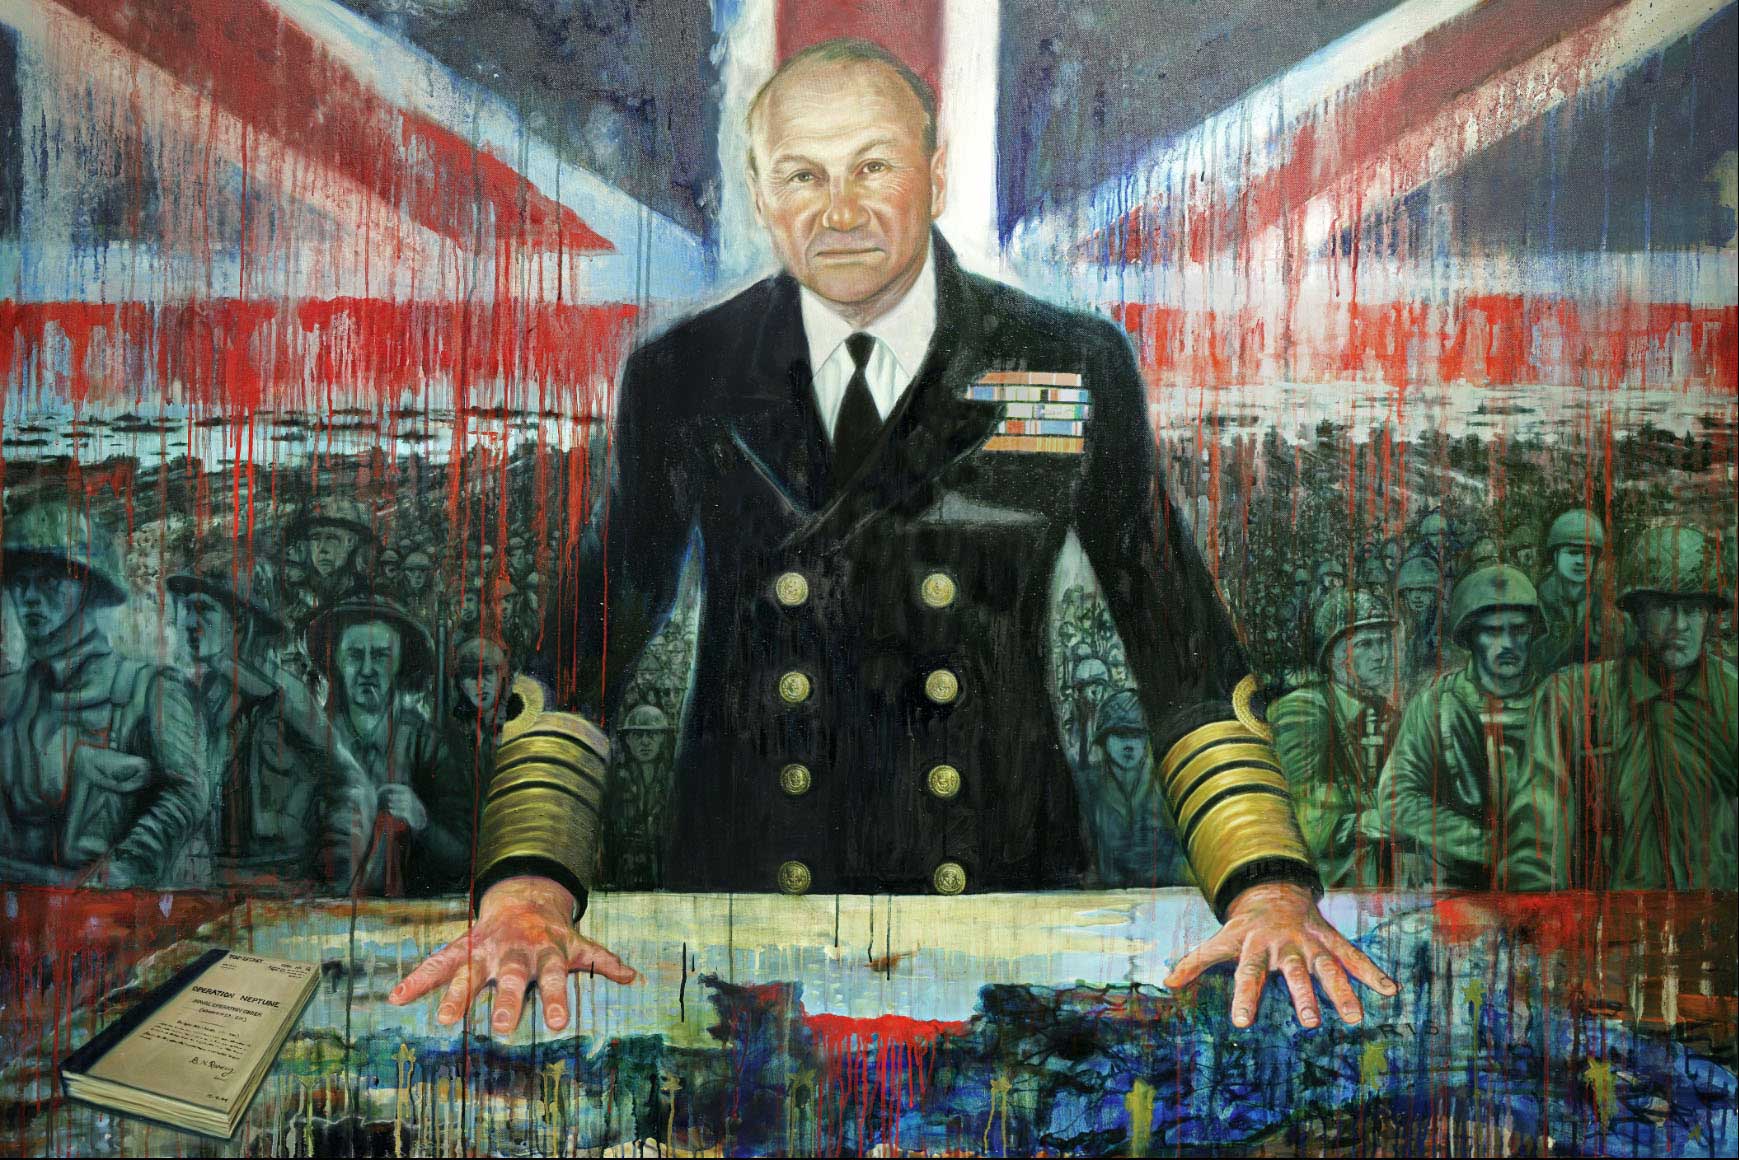 Admiral Ramsay. Oil on Canvas, 150x 120cm. Commissioned by Portsmouth City Council, D-Day 75th Commemorations 2019. Now in the Royal Navy Collections.